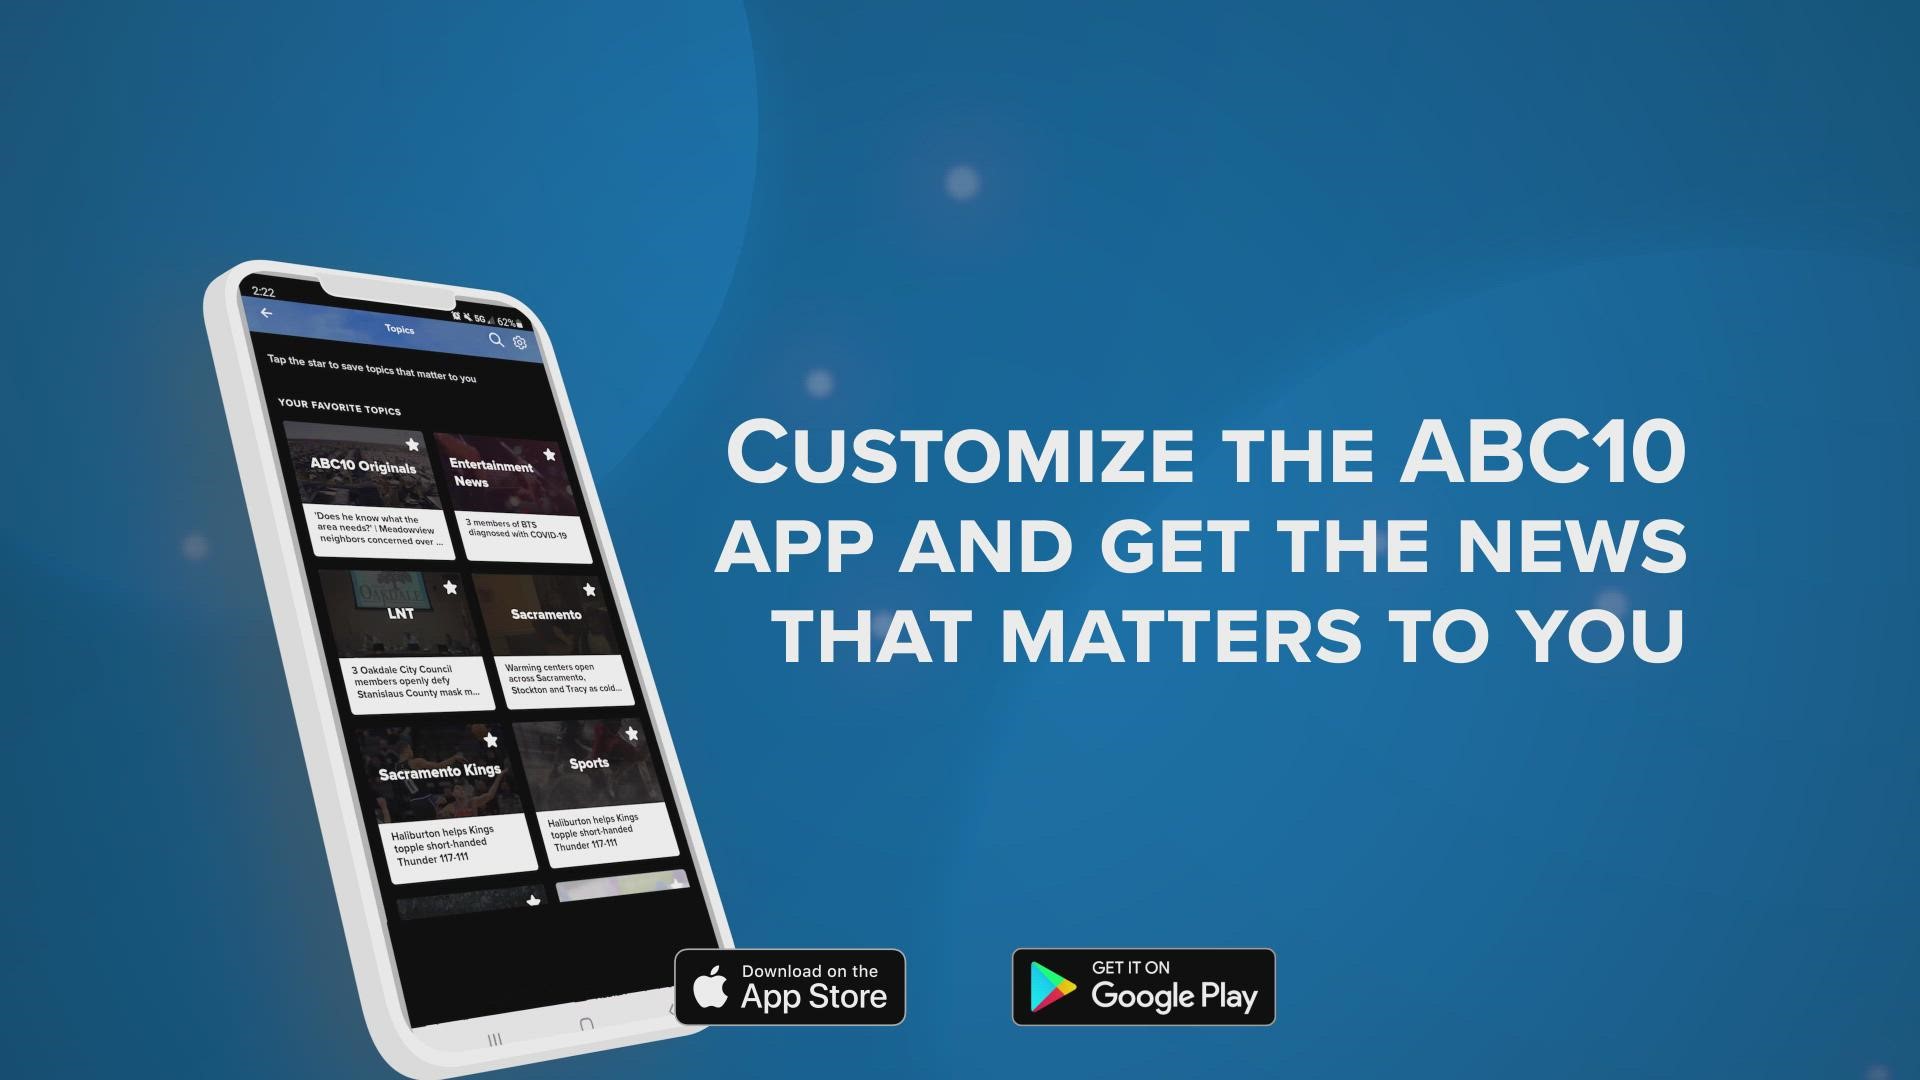 When you download the ABC10 app, you can customize notifications for the city you live in.